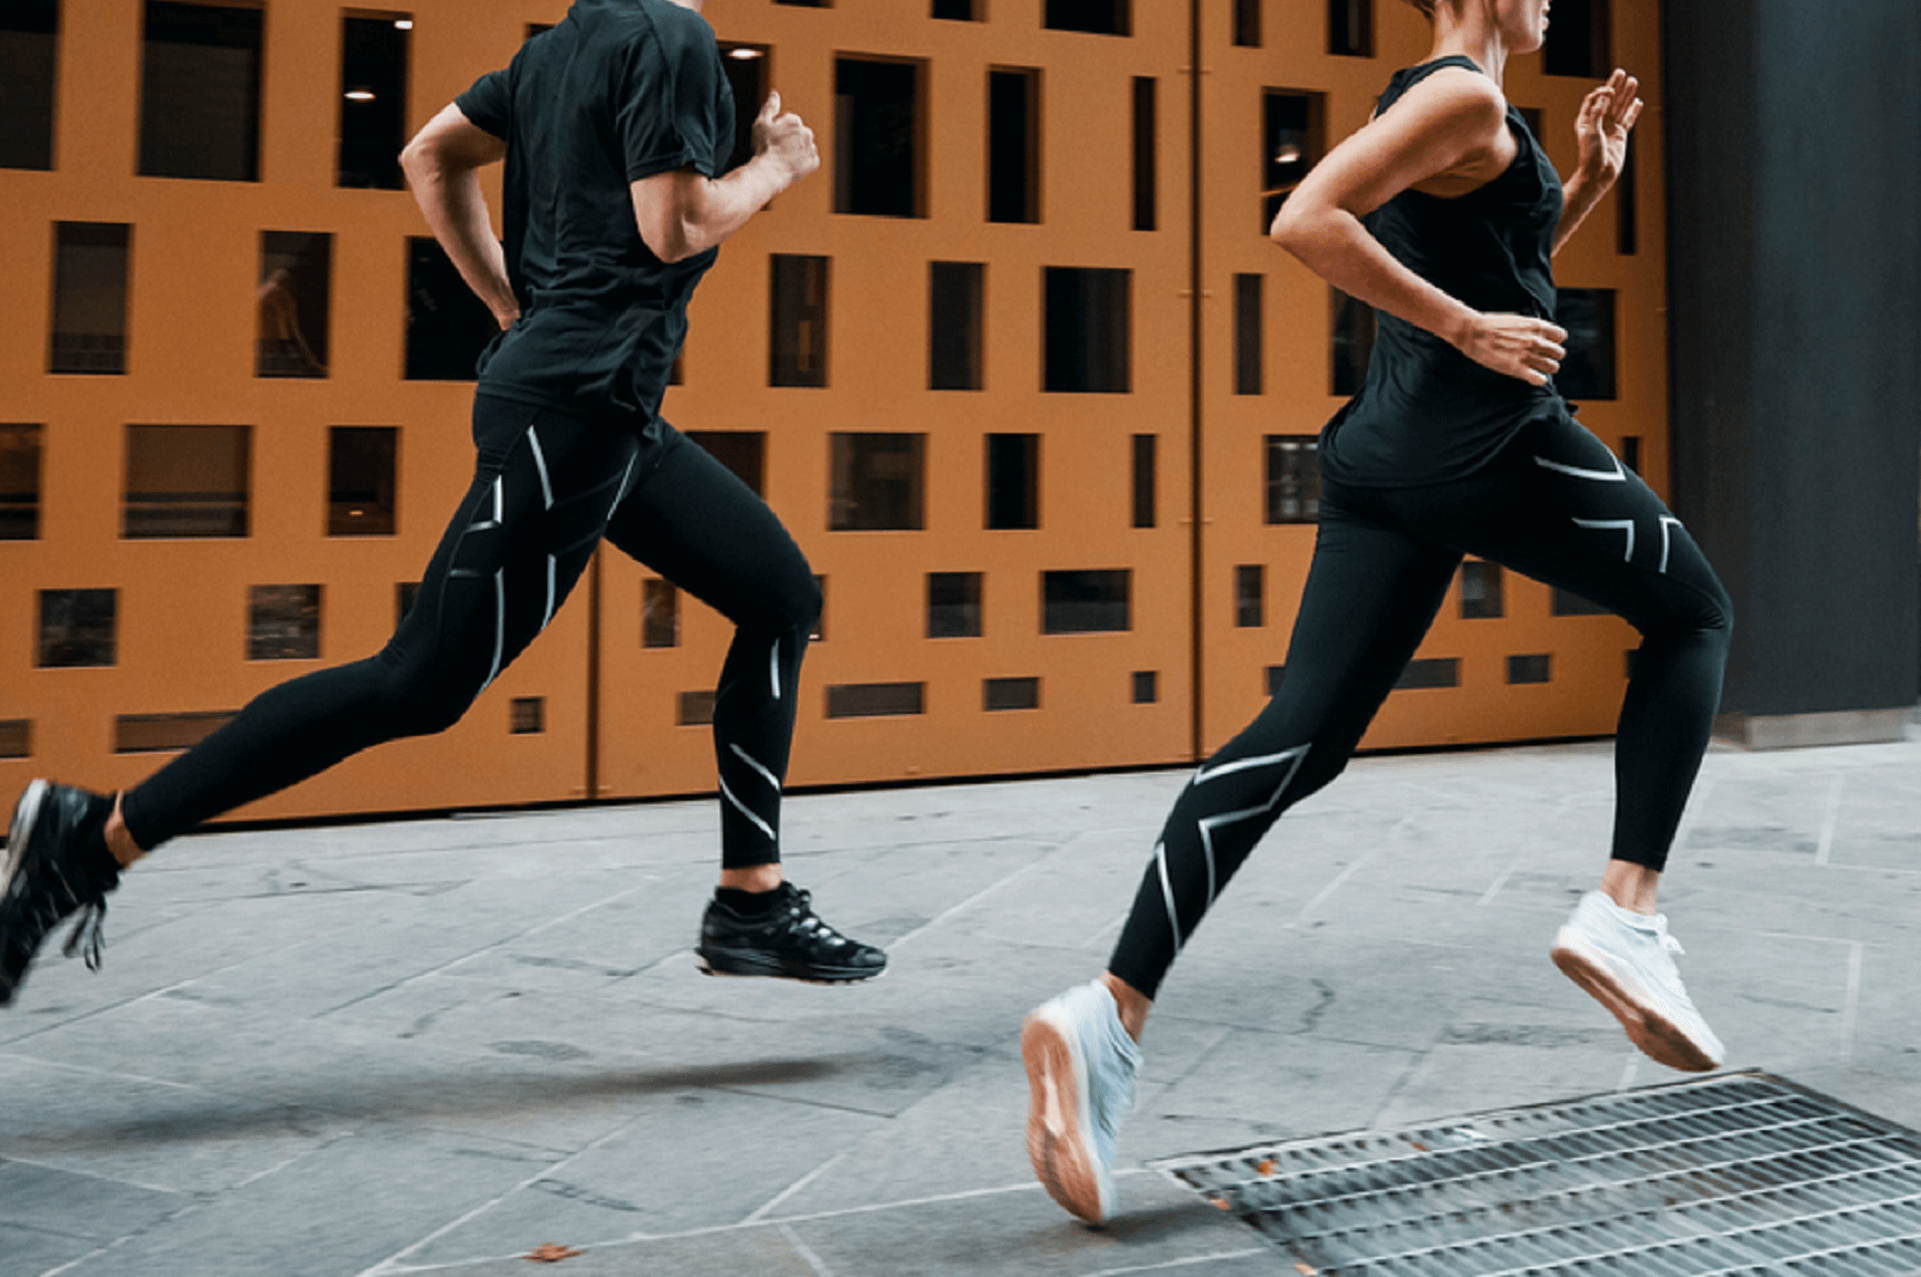 The Benefits of Compression Wear - Sundried Activewear Activewear